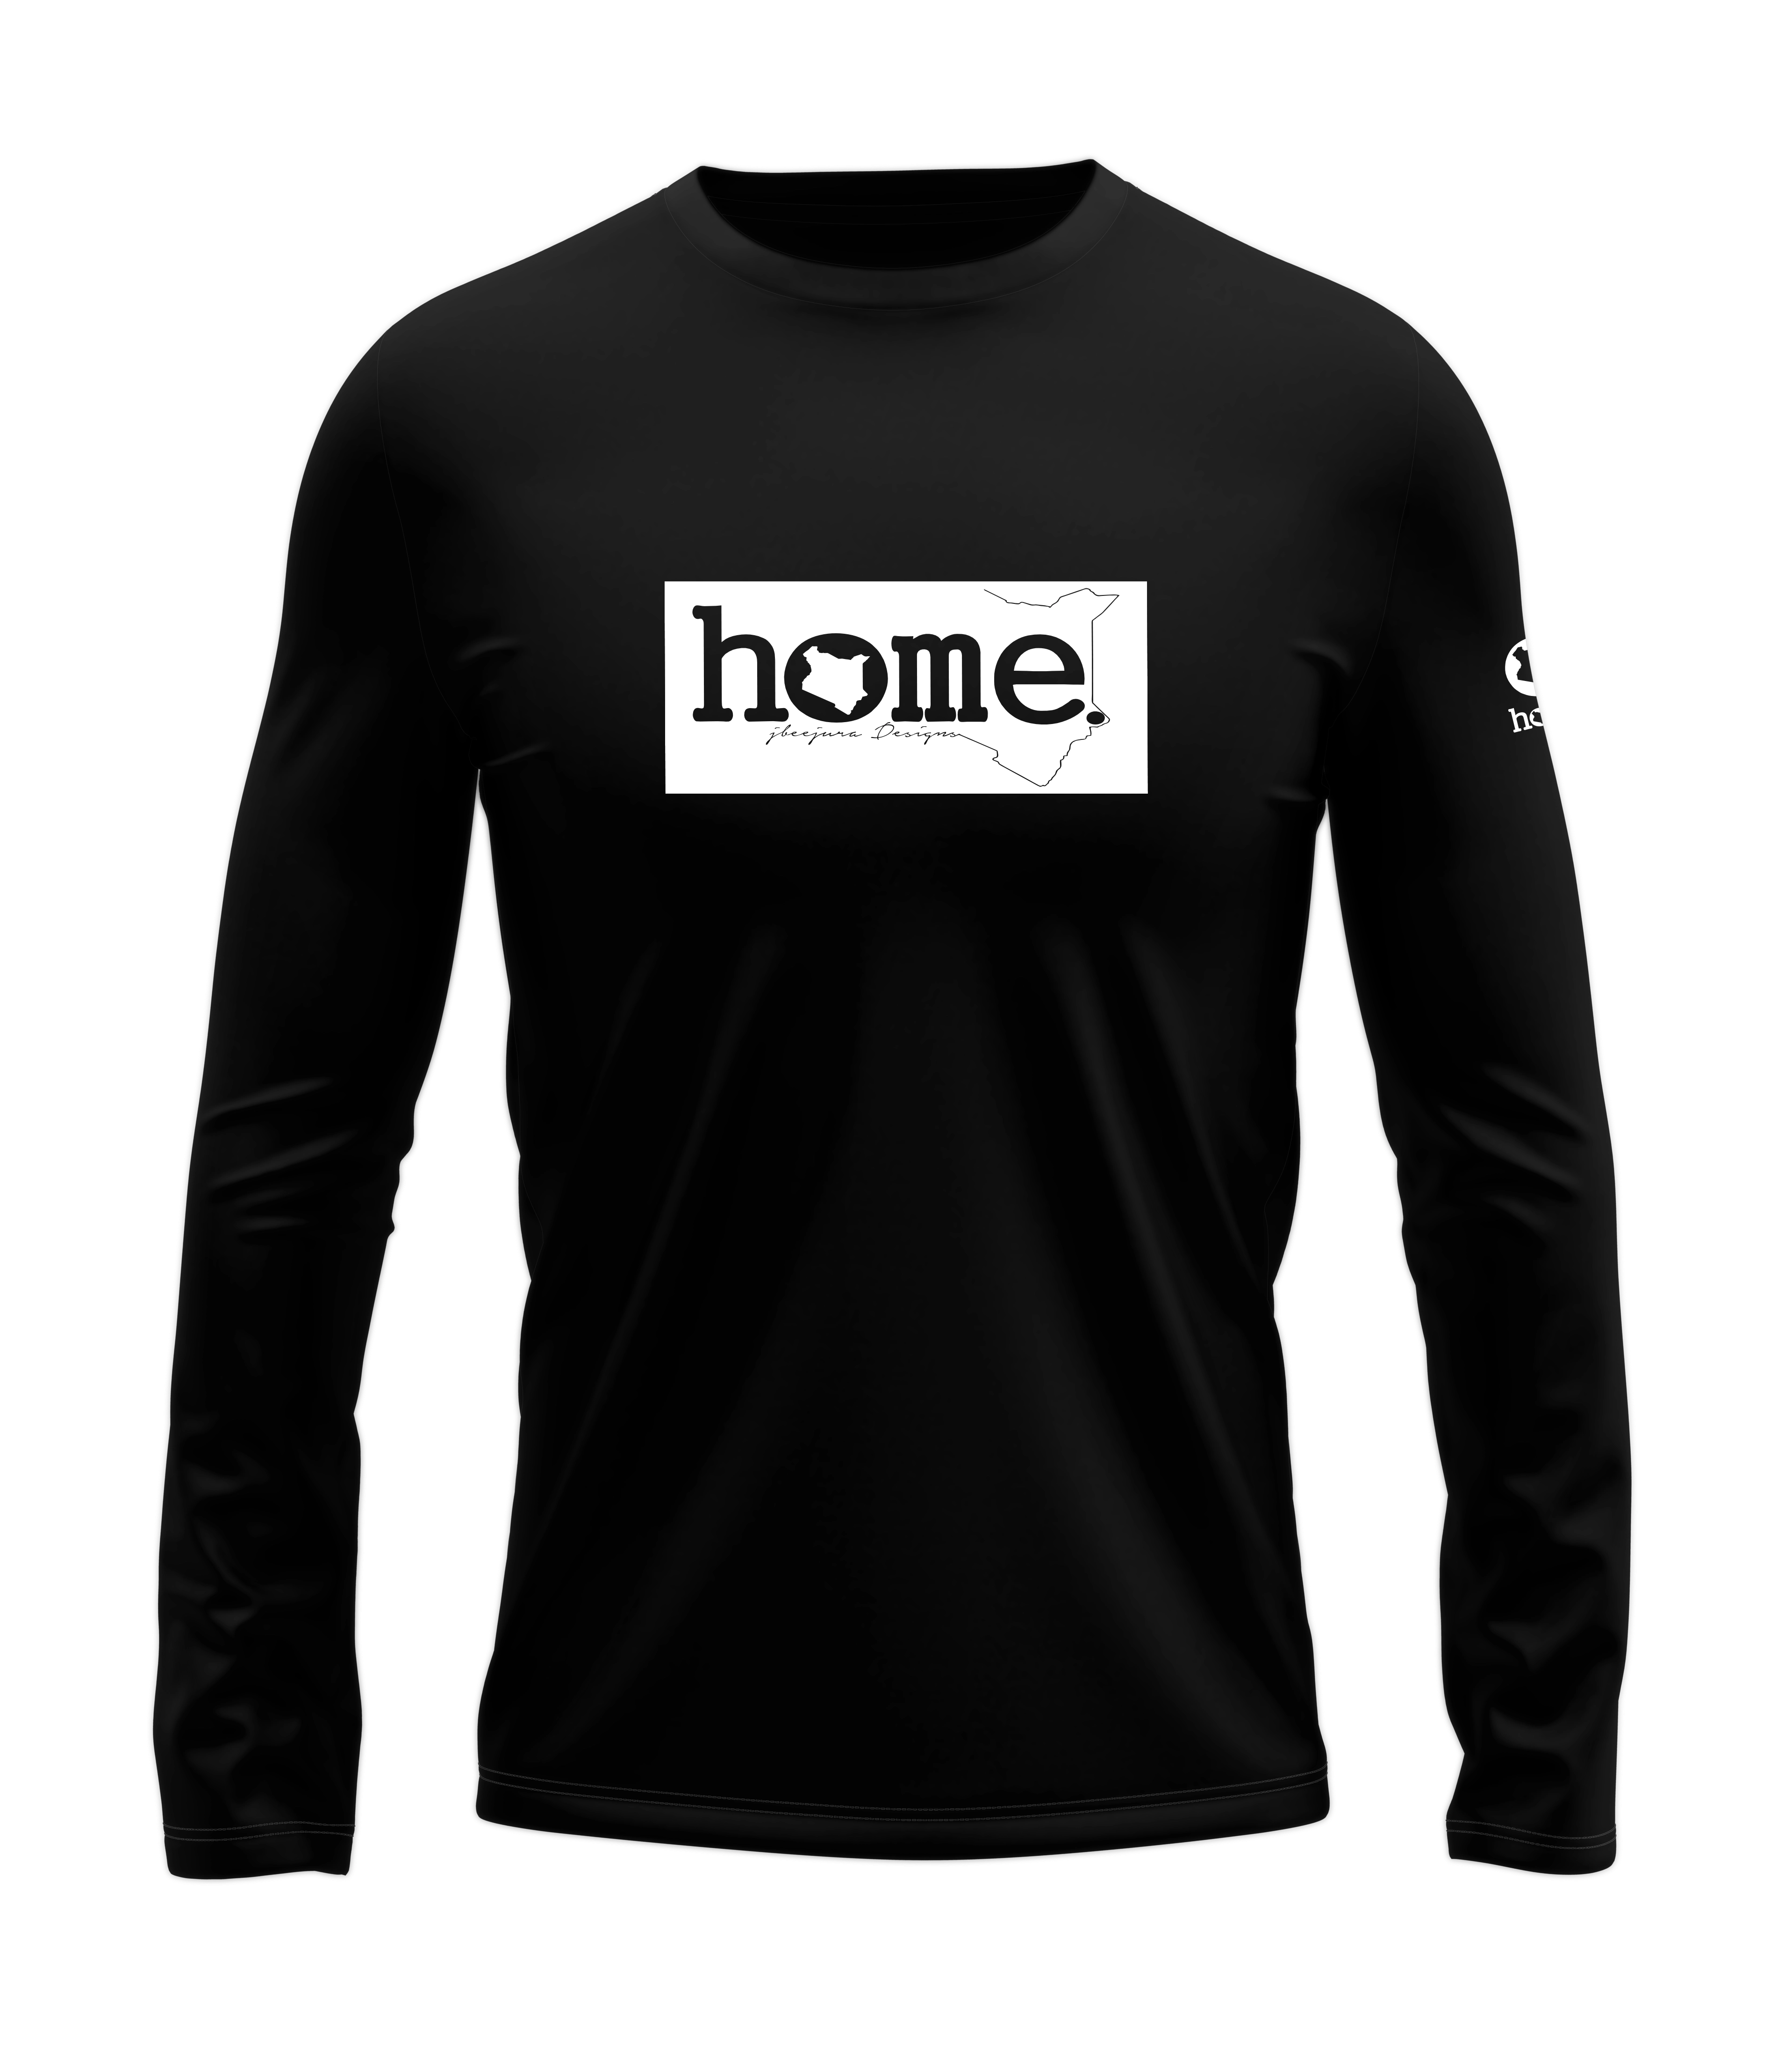 home_254 LONG-SLEEVED BLACK T-SHIRT WITH A WHITE CLASSIC PRINT – COTTON PLUS FABRIC